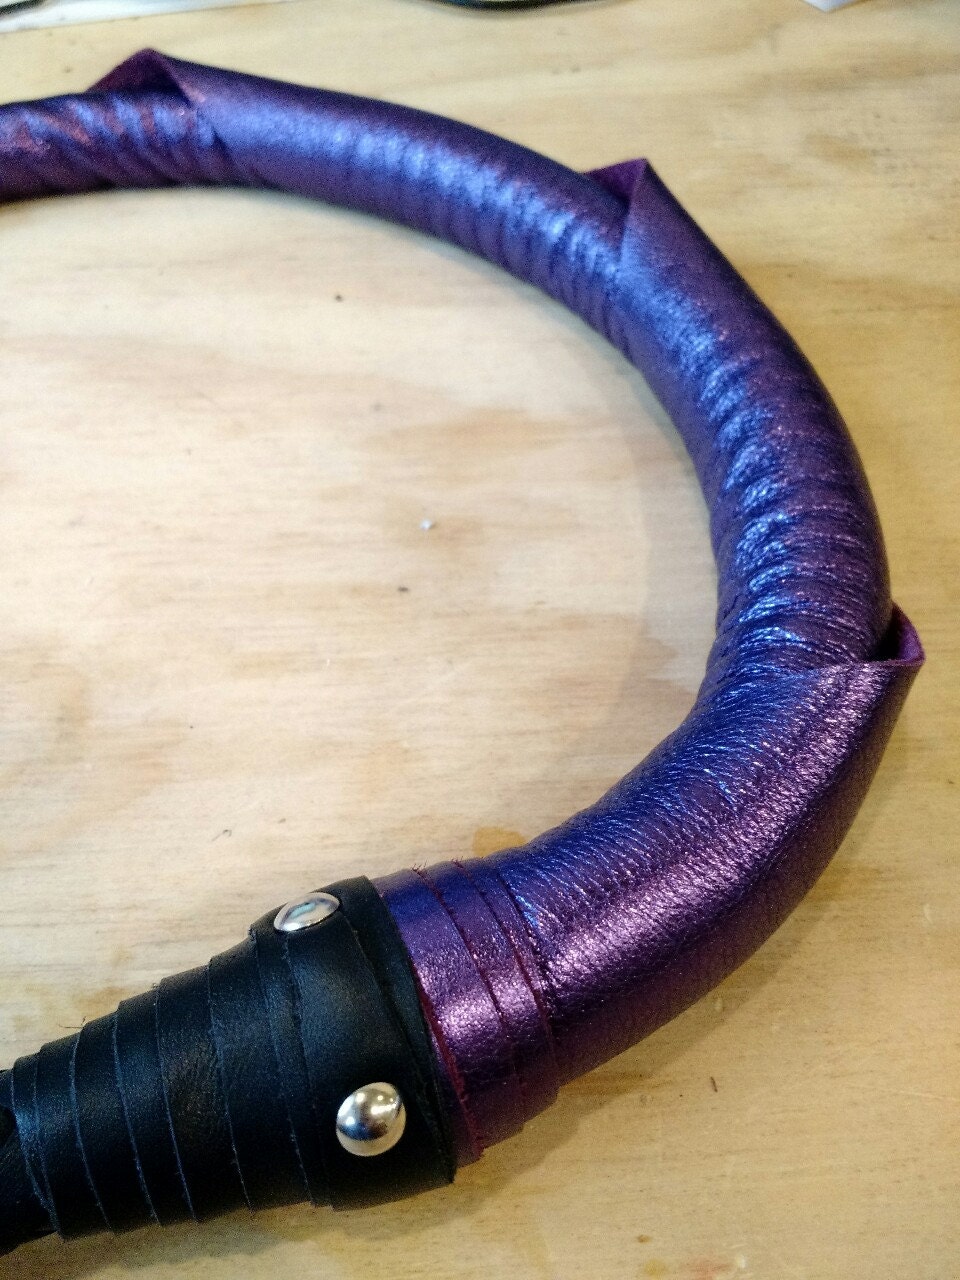 Bdsm Leather Dragon Tail Whip Custom To Order Leather Adult Toy For Kink Dragontail From